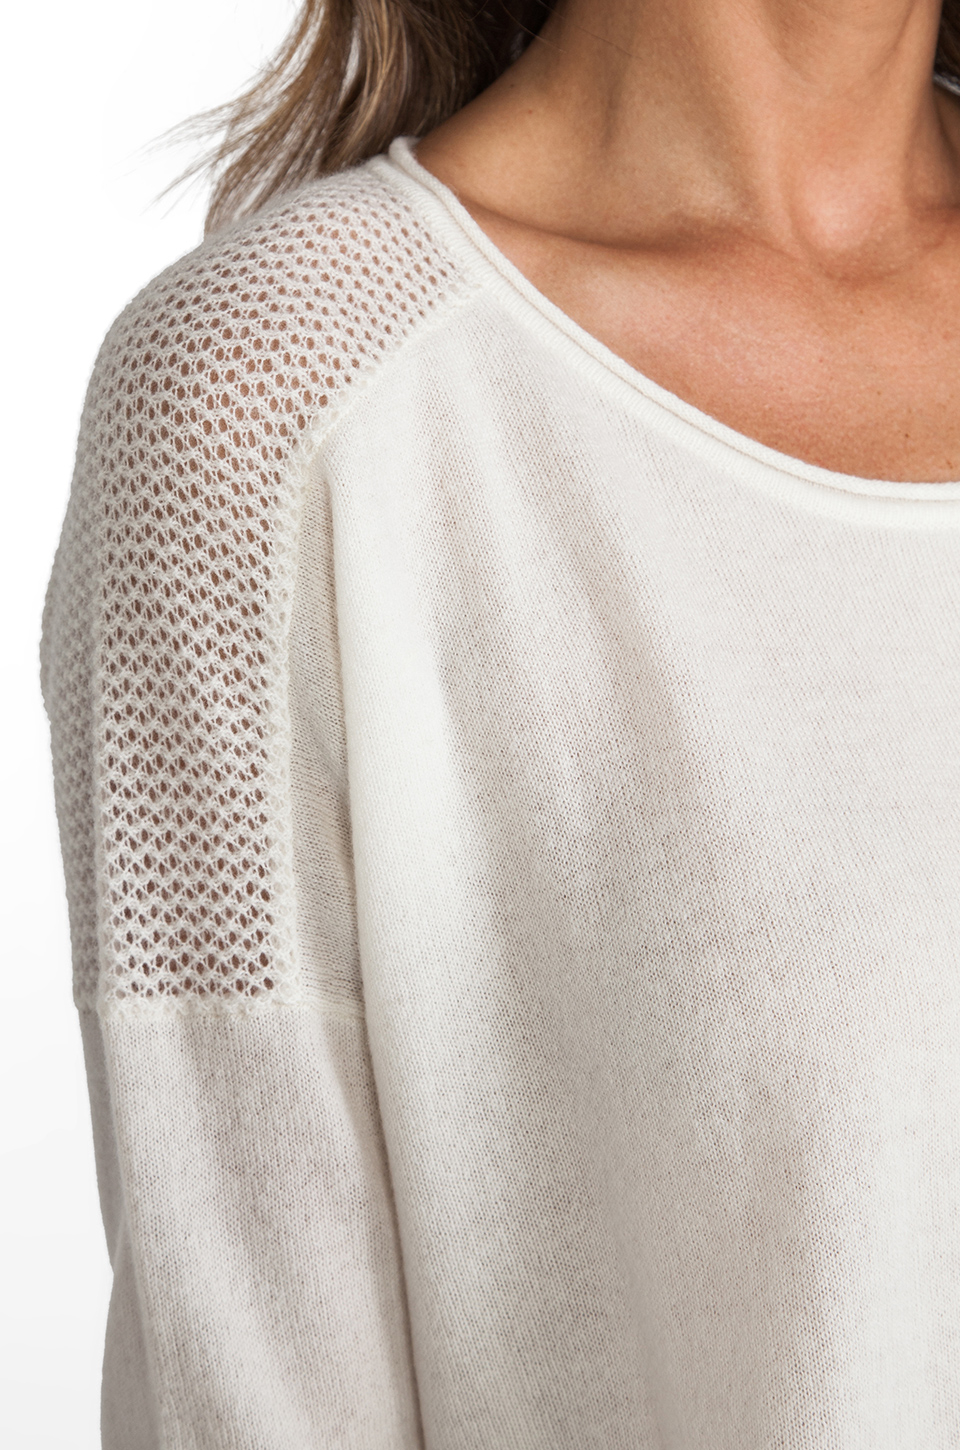 Lyst - Vince Cashmere Sweater in White